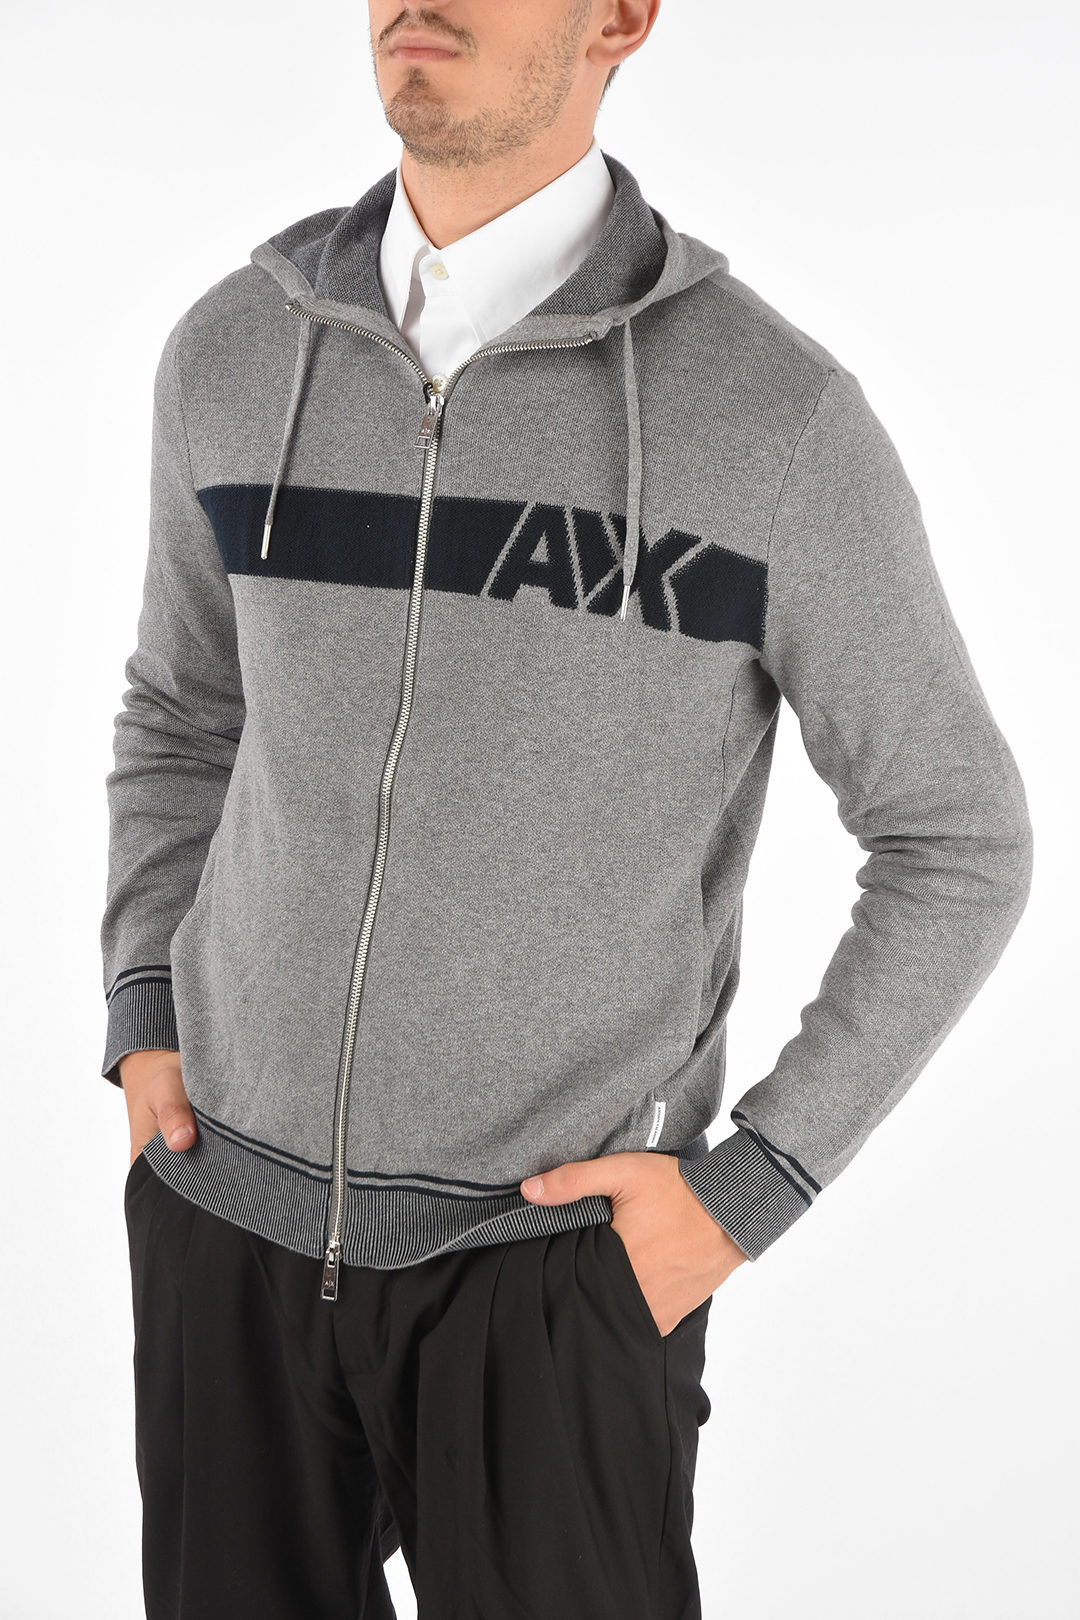 Armani Exchange Pullover Hoodie Offer Store, Save 58% 